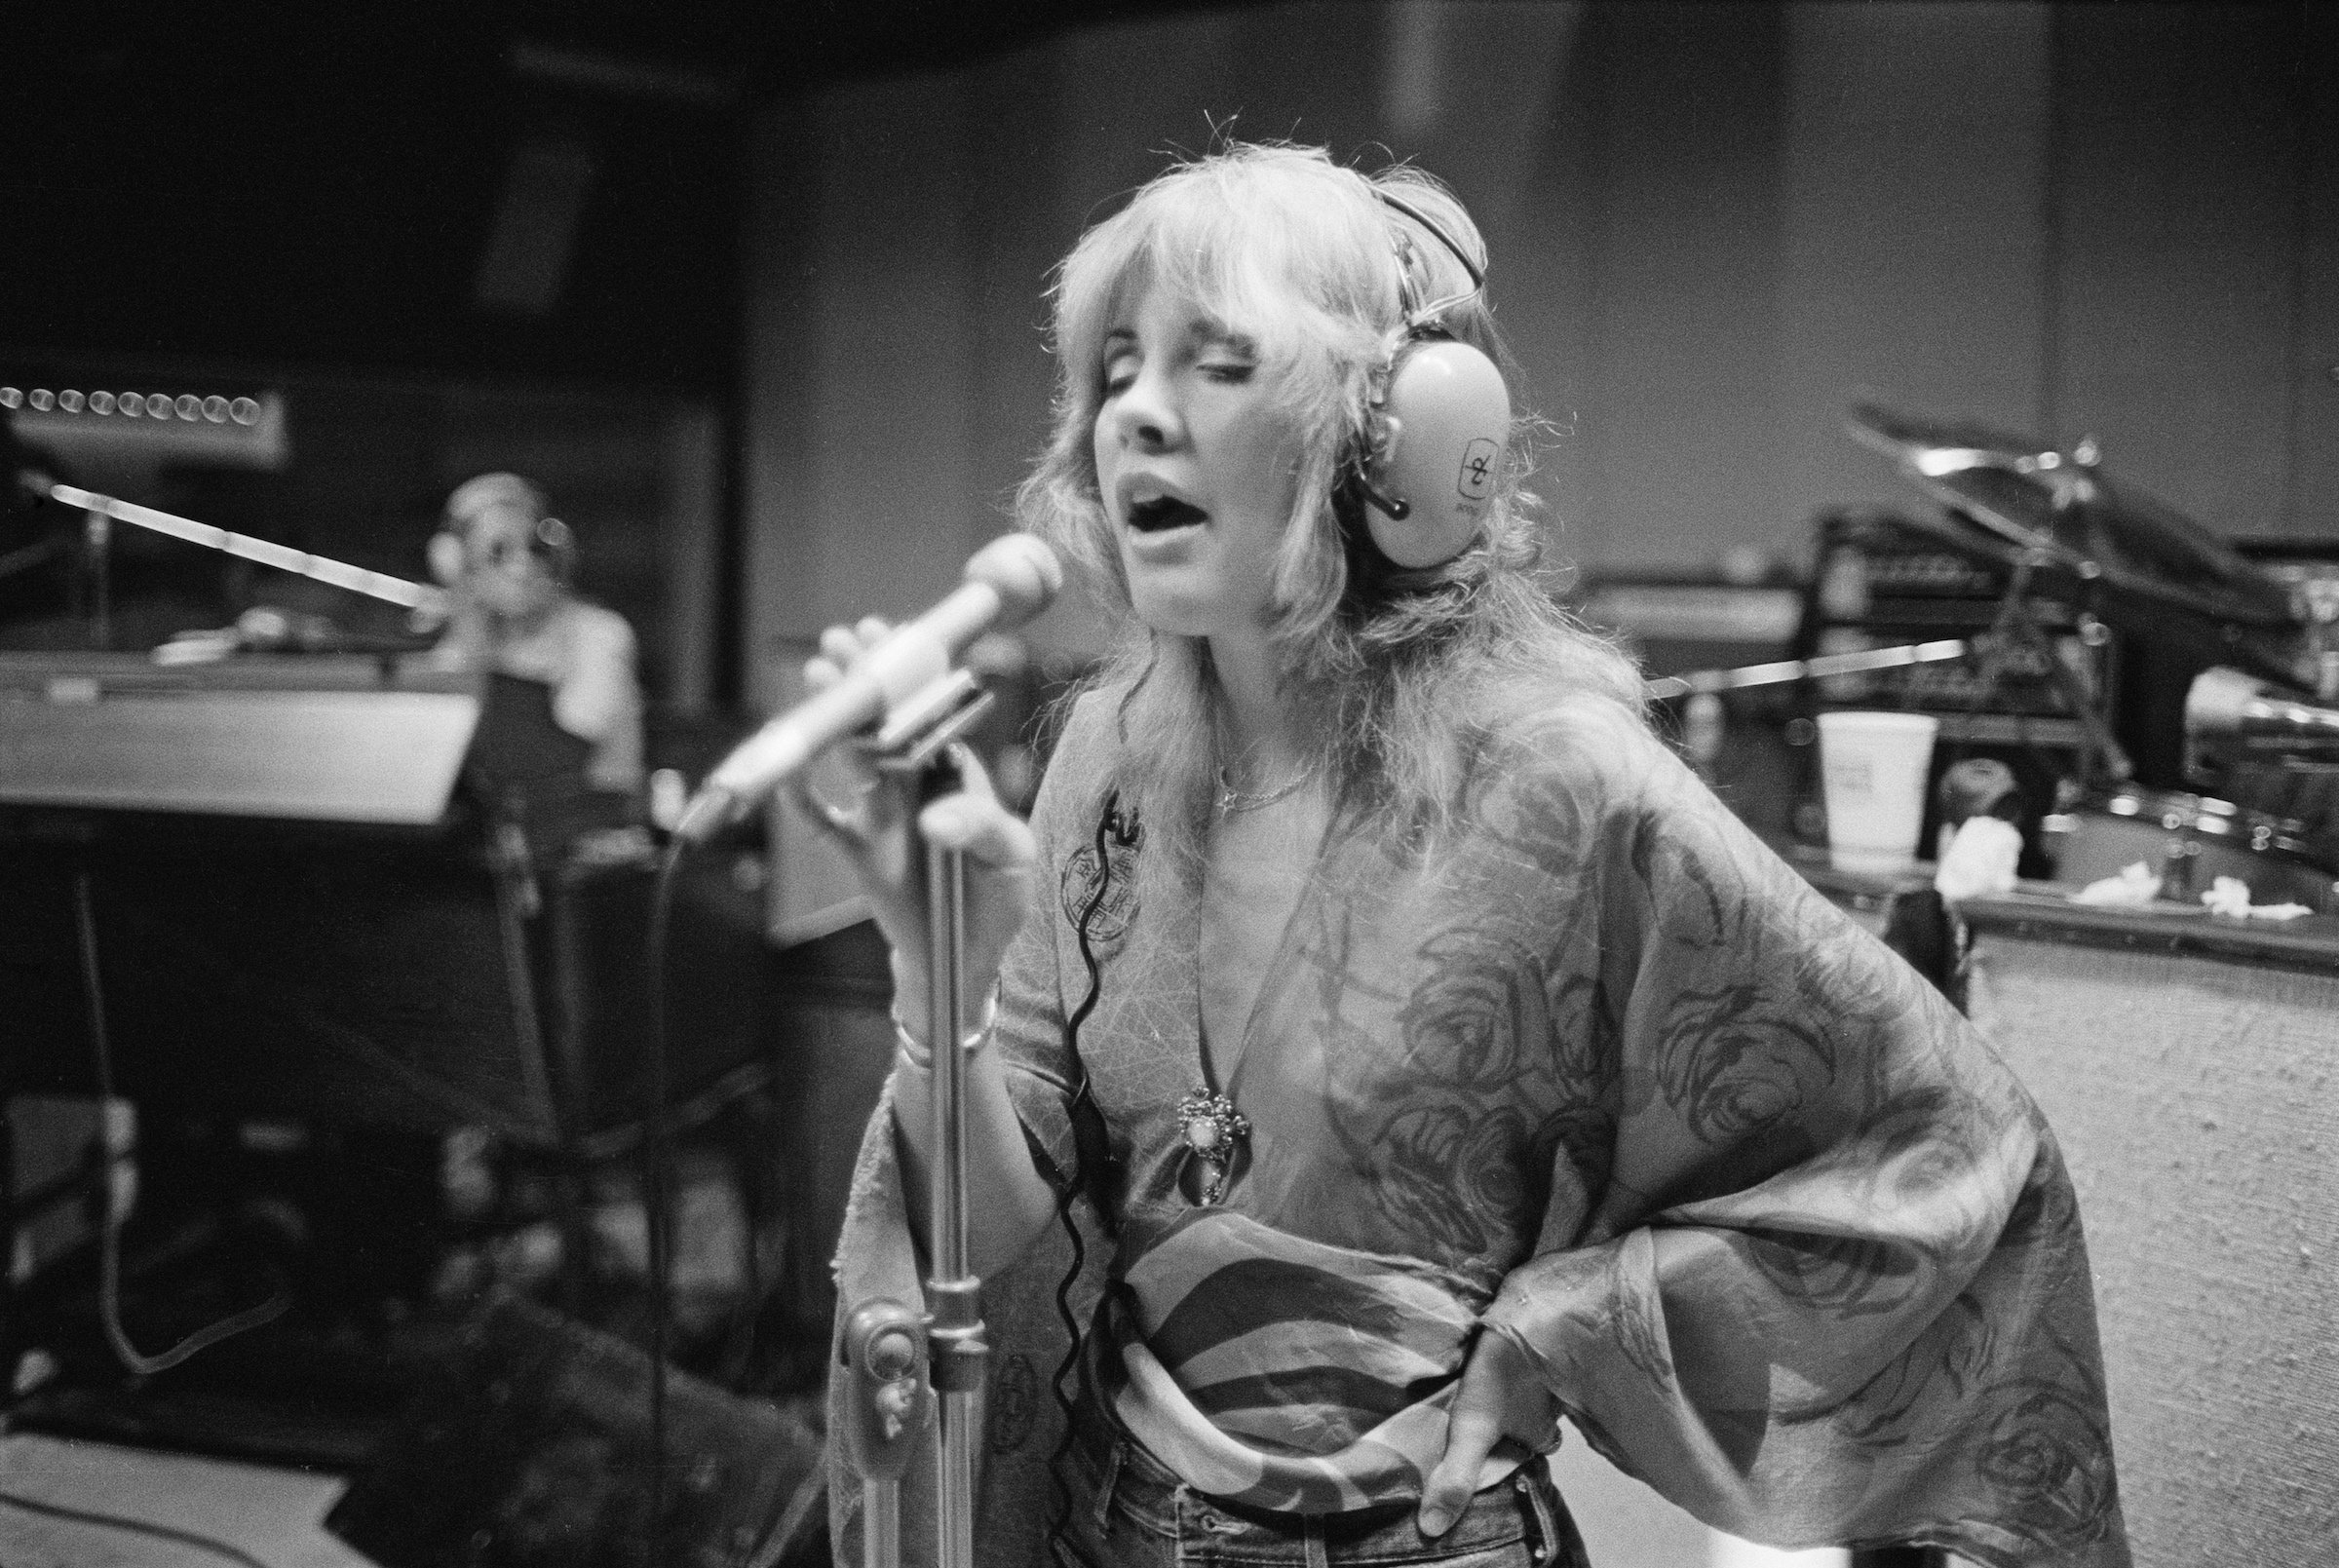 Singer Stevie Nicks of British-American rock band Fleetwood Mac in a recording studio in New Haven, Connecticut